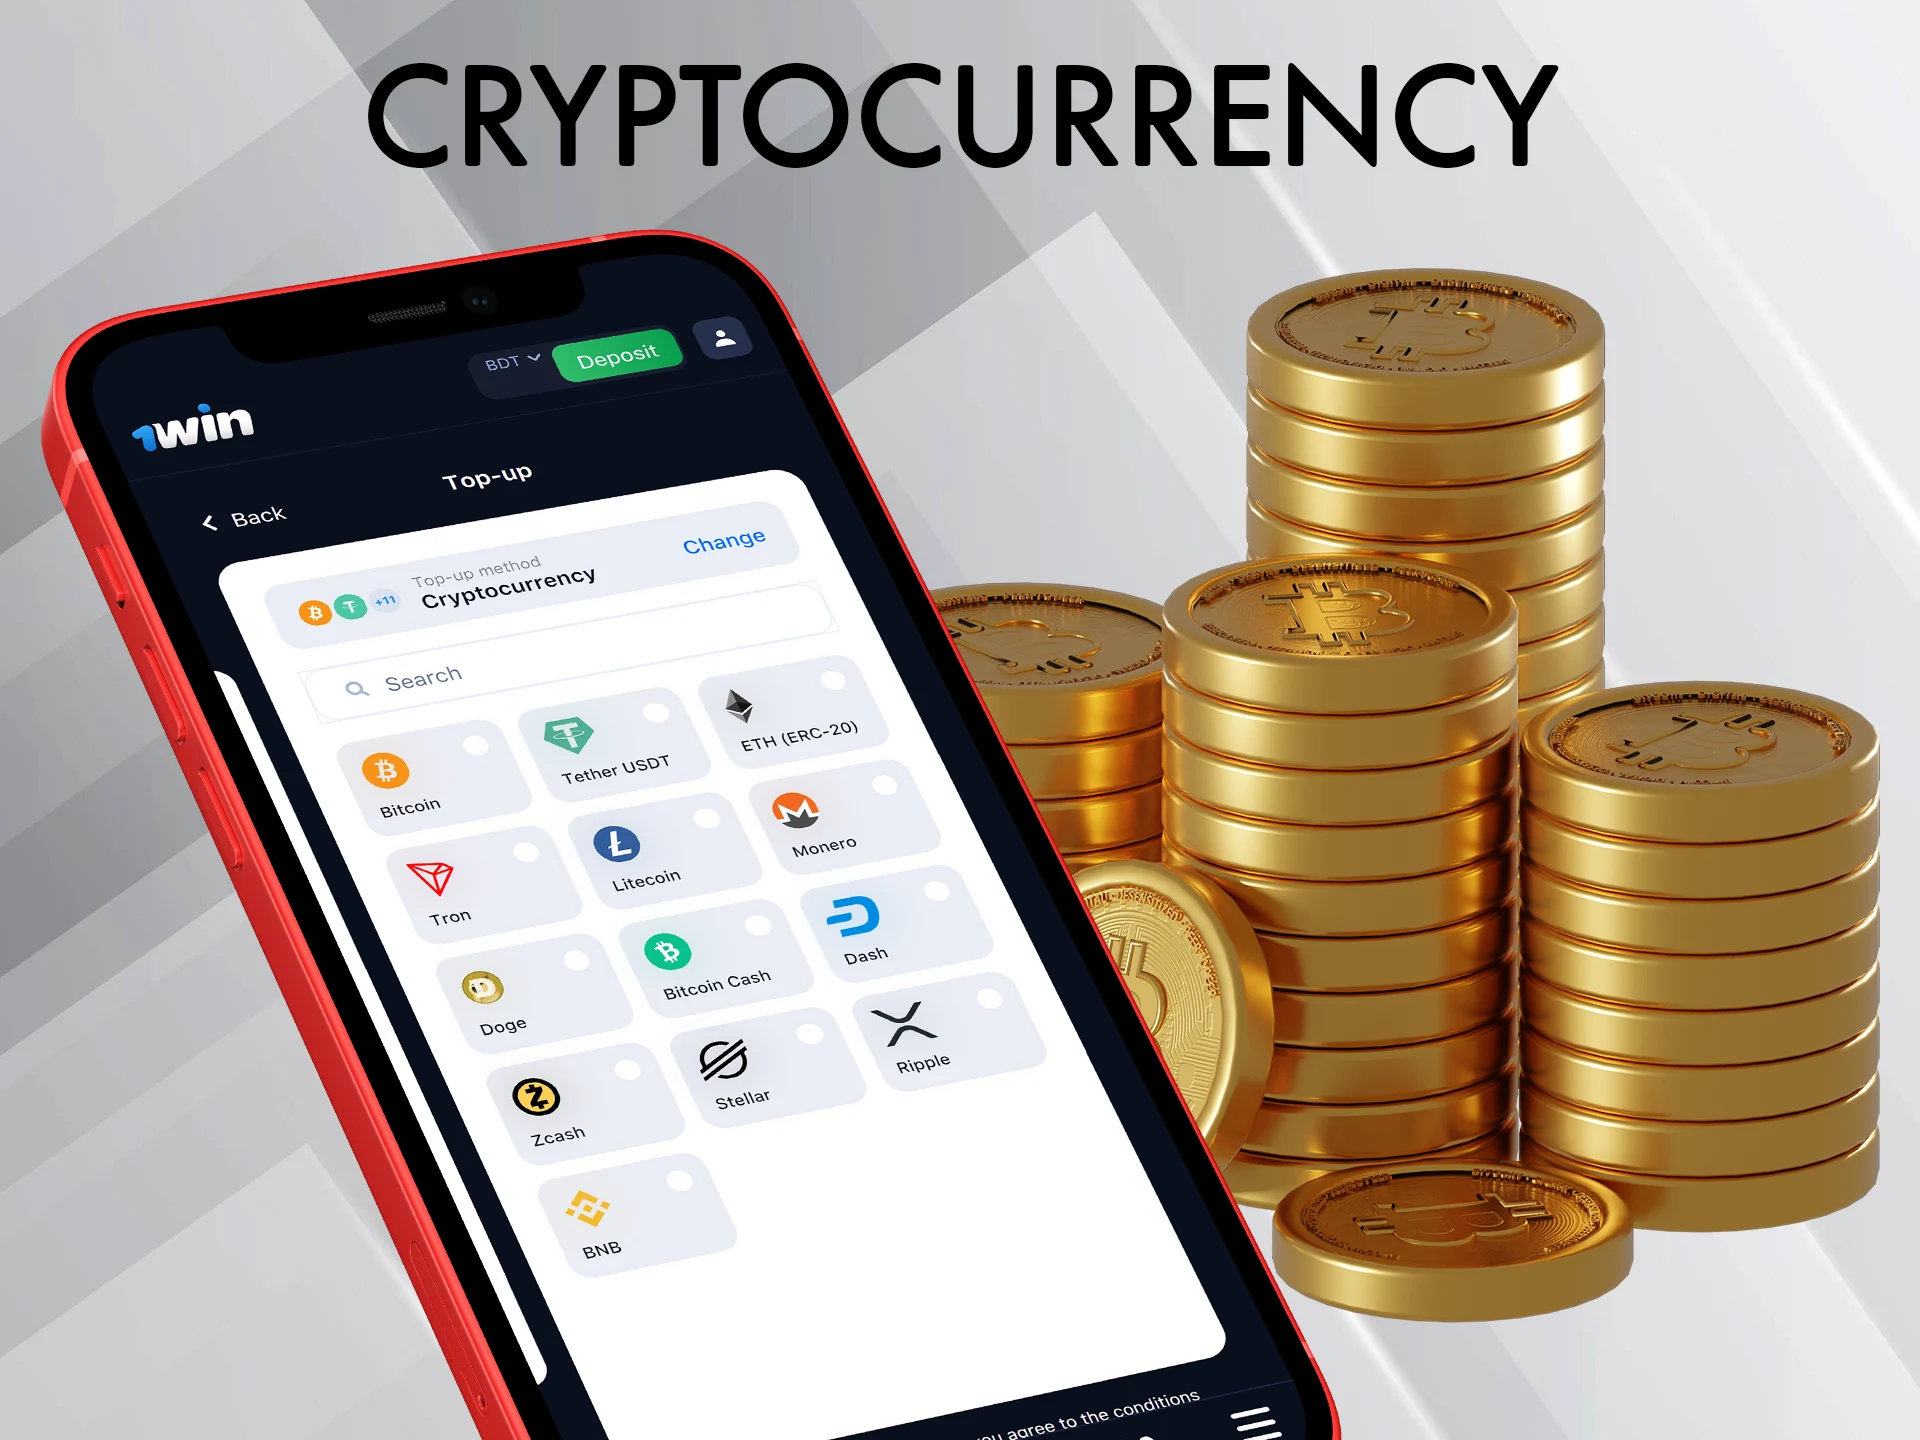 Transactions can be made using cryptocurrency.